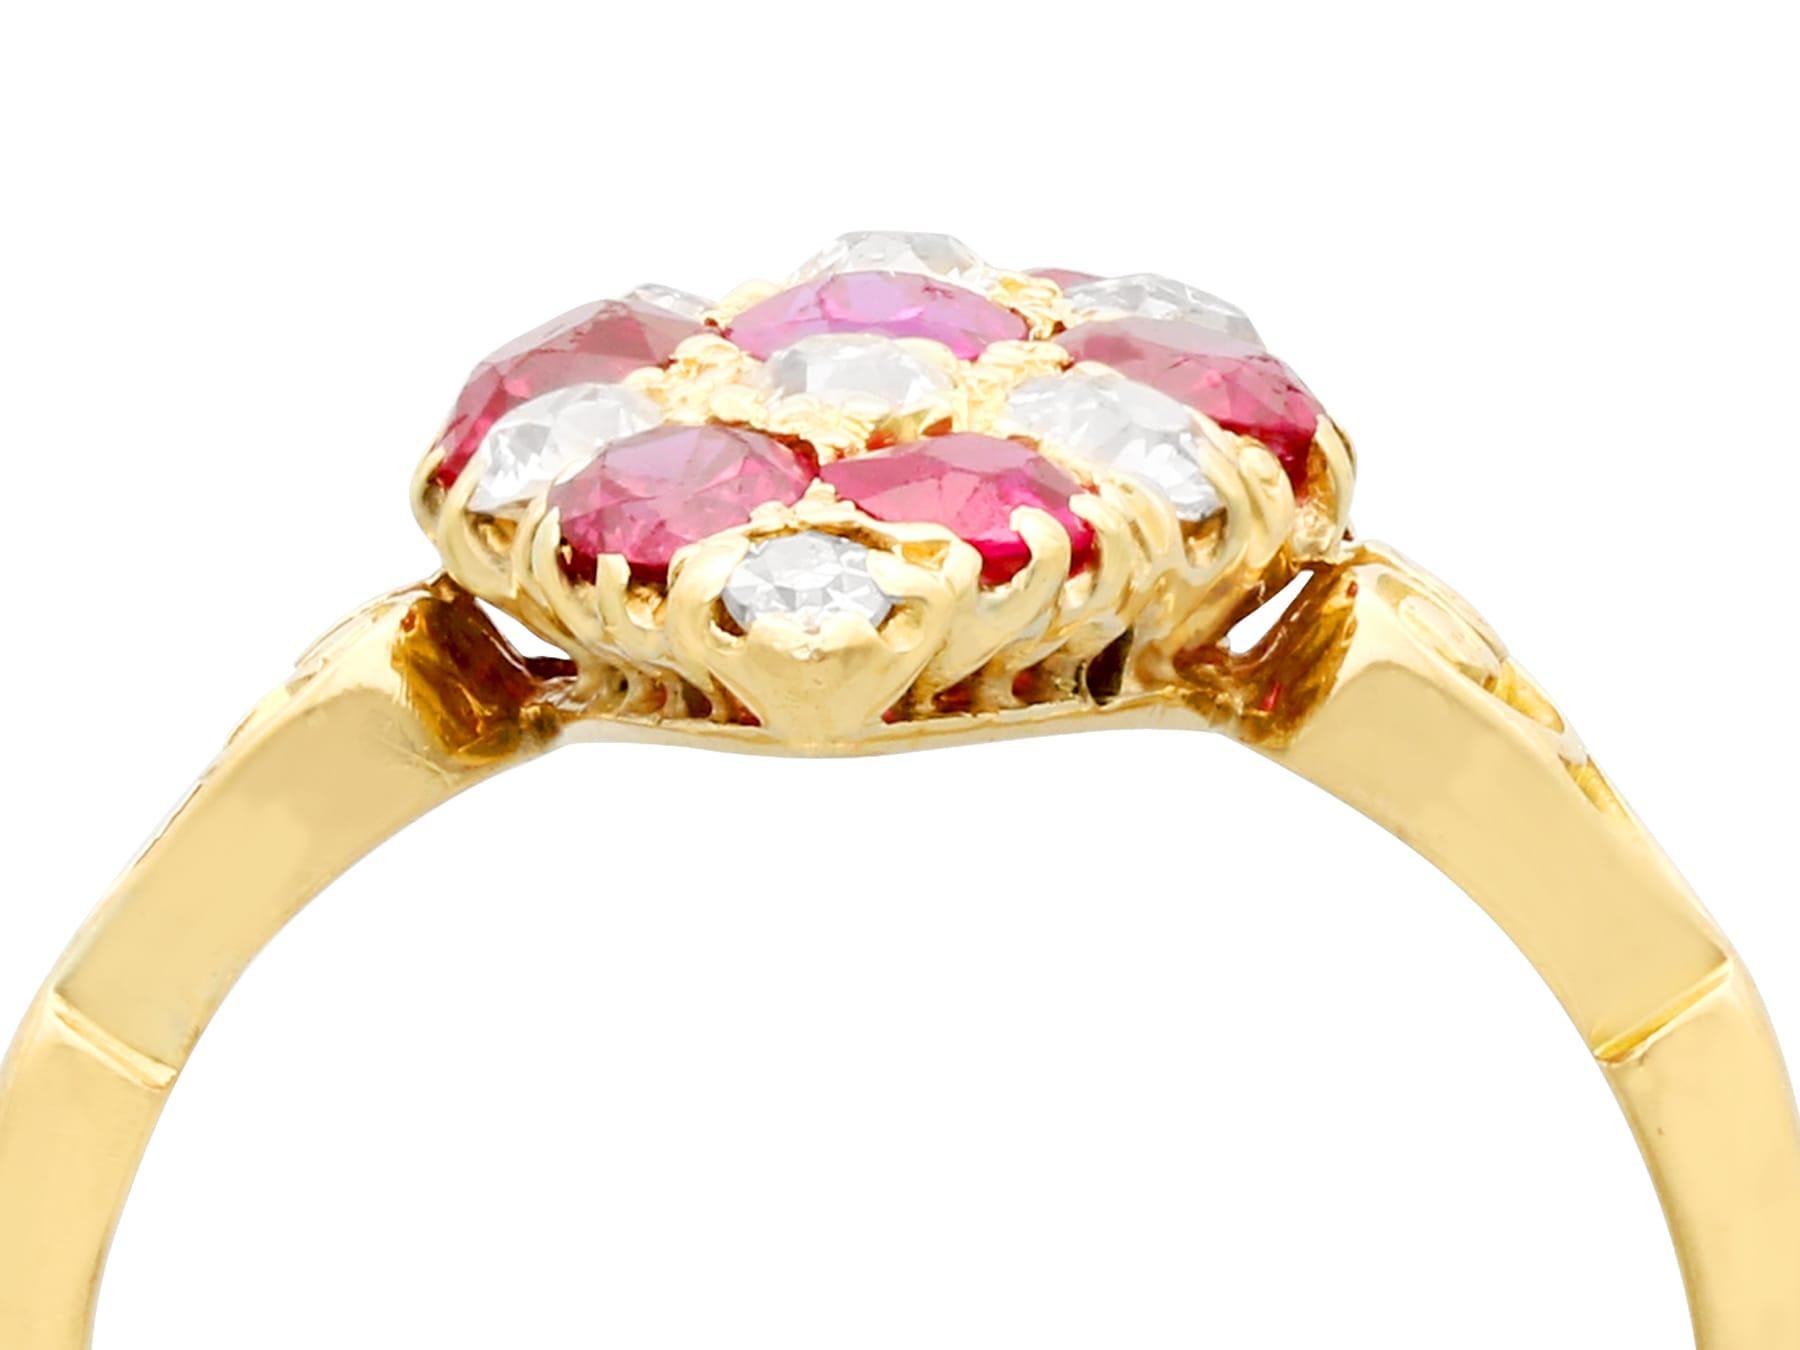 A stunning antique 1.82 Ct ruby and 0.57 Ct diamond, 18k yellow gold marquise ring; part of our diverse antique jewelry and estate jewelry collections.

This stunning, fine and impressive antique ruby and diamond ring has been crafted in 18k yellow